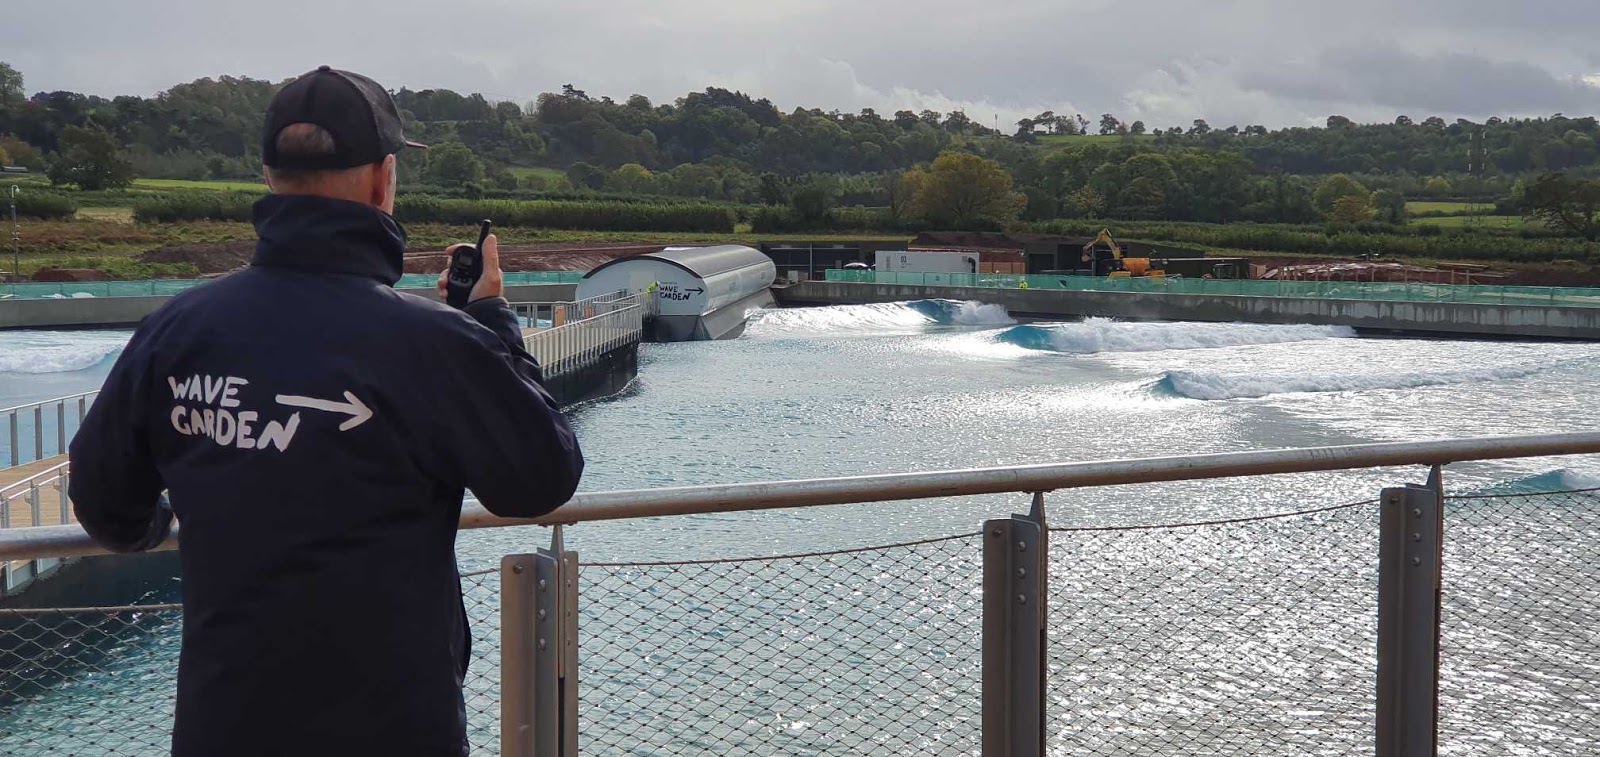 First Waves at the Wavegarden Cove Bristol England